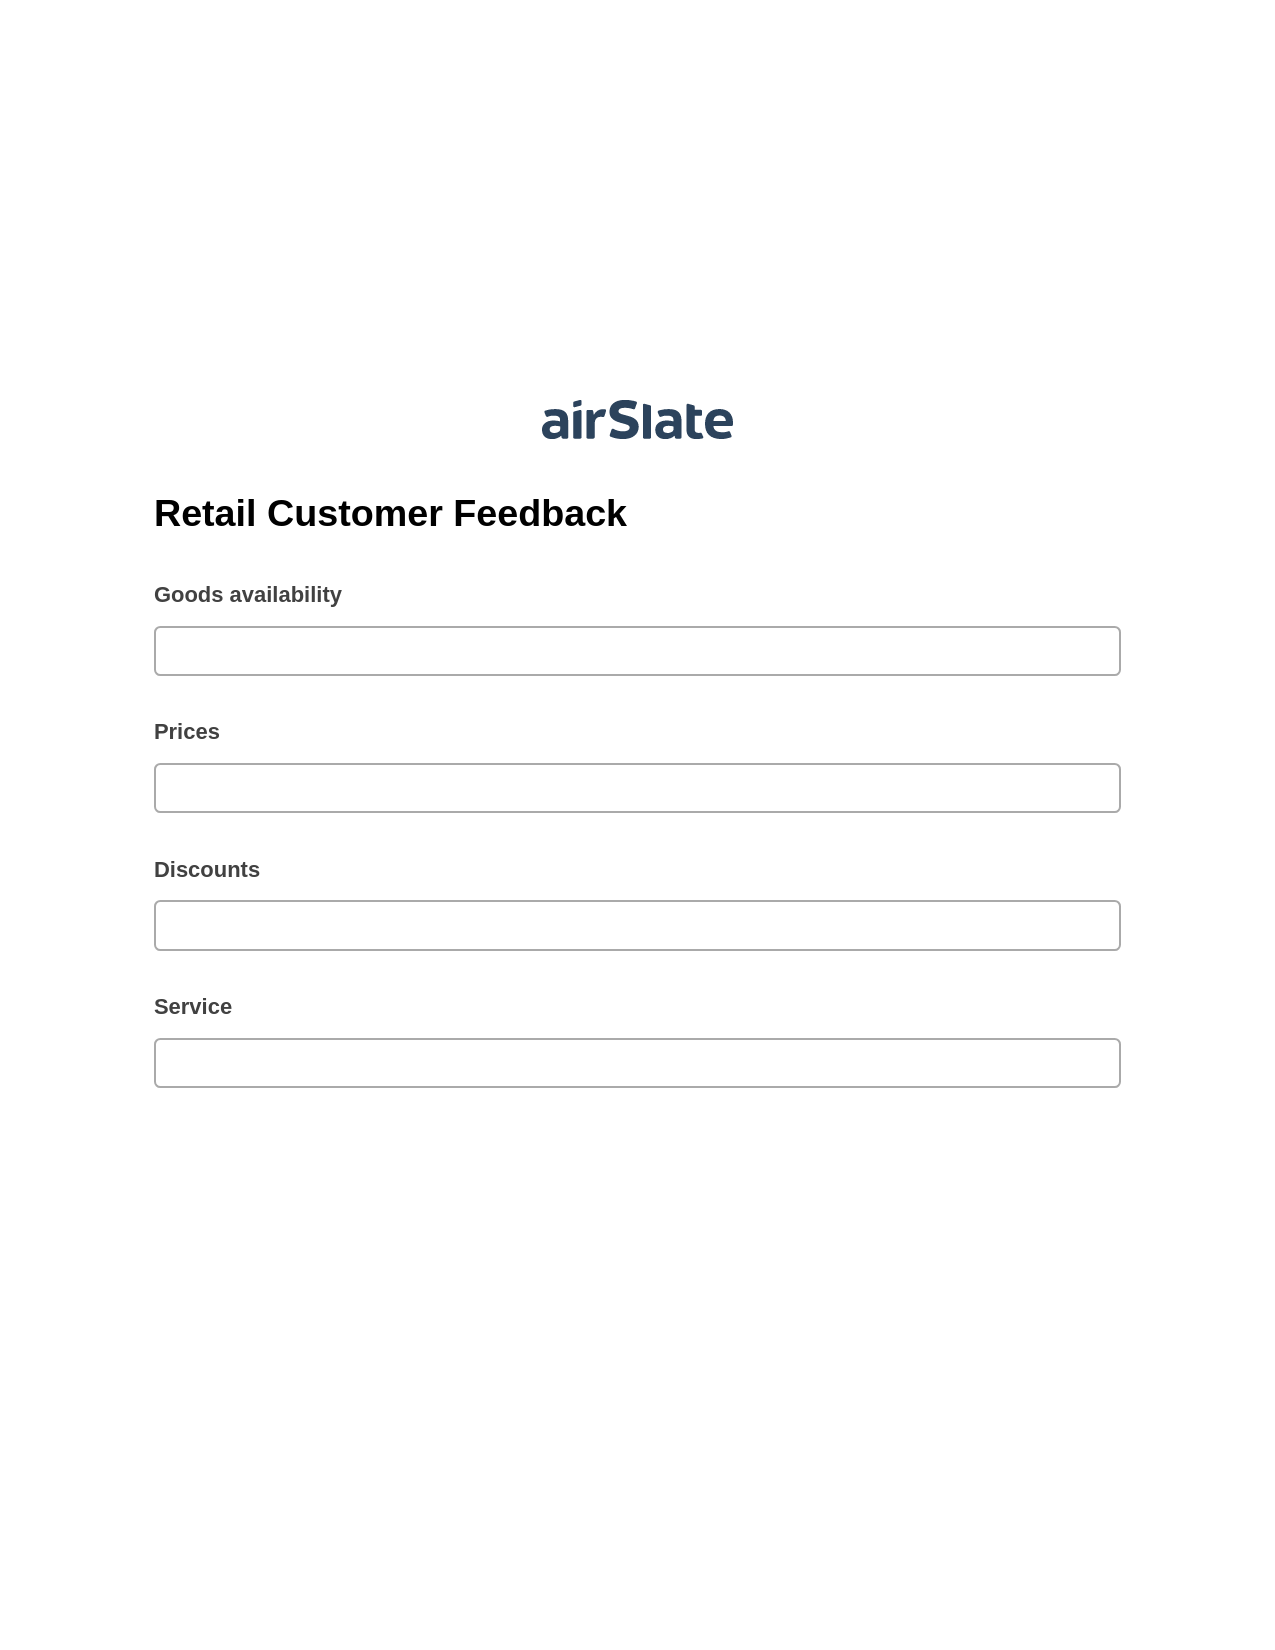 Retail Customer Feedback Pre-fill from Office 365 Excel Bot, Create slate from another Flow Bot, Export to Excel 365 Bot